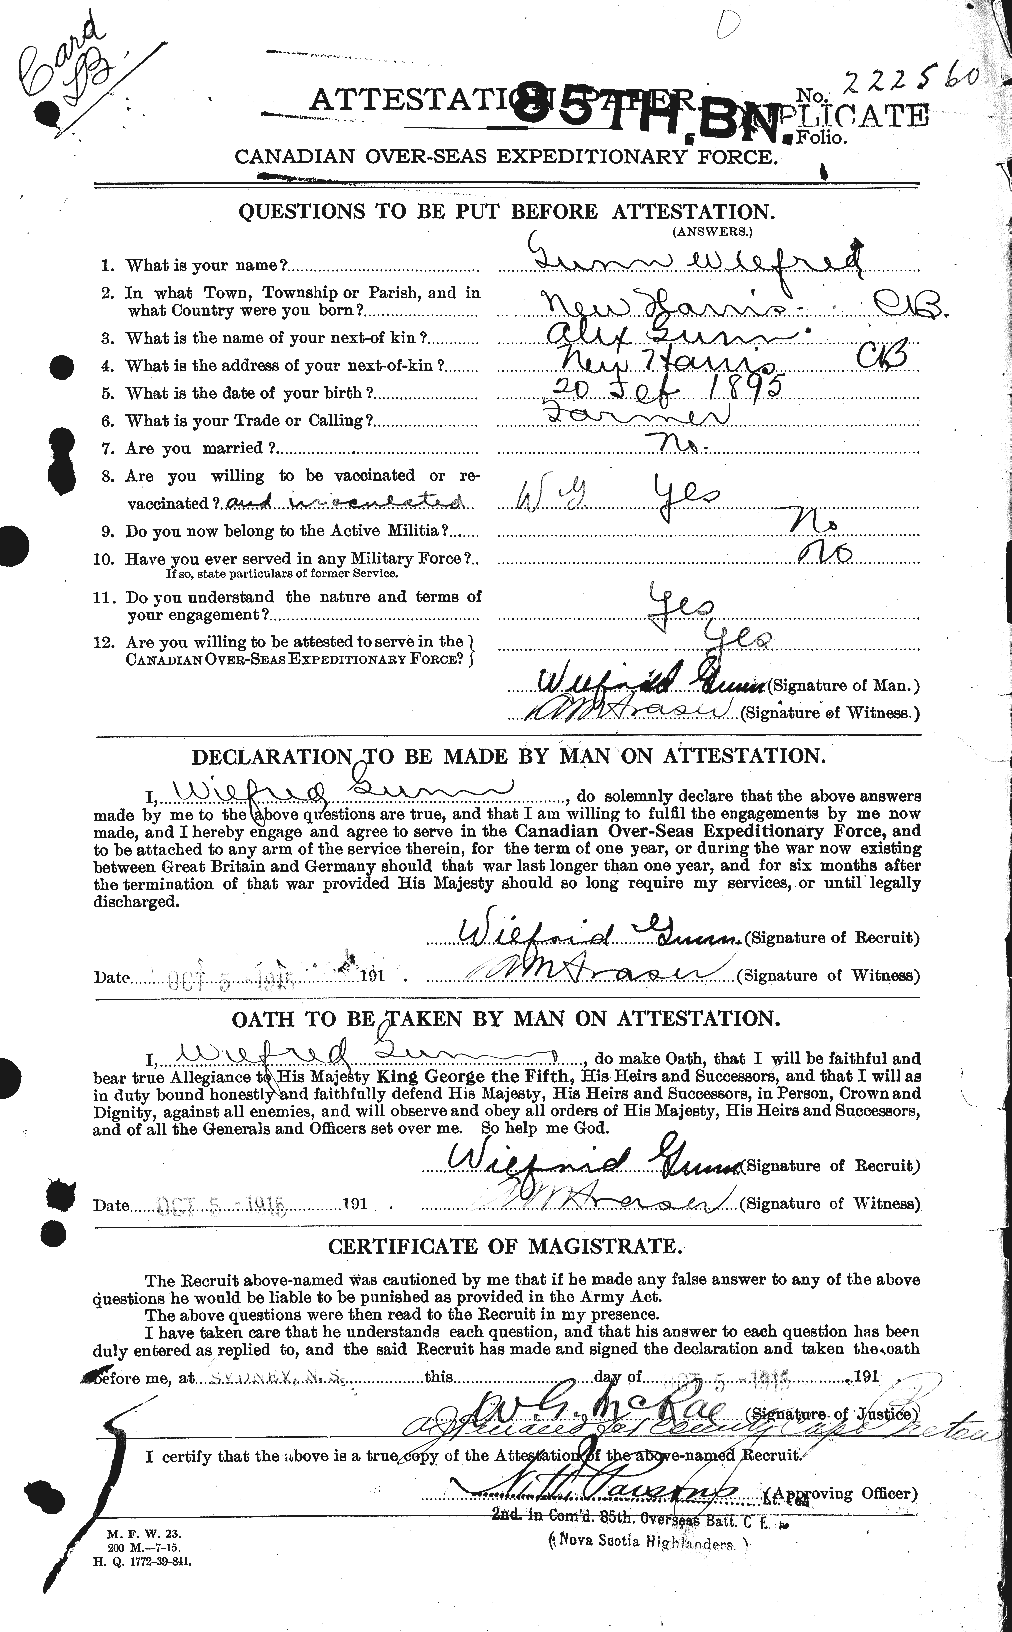 Personnel Records of the First World War - CEF 369347a